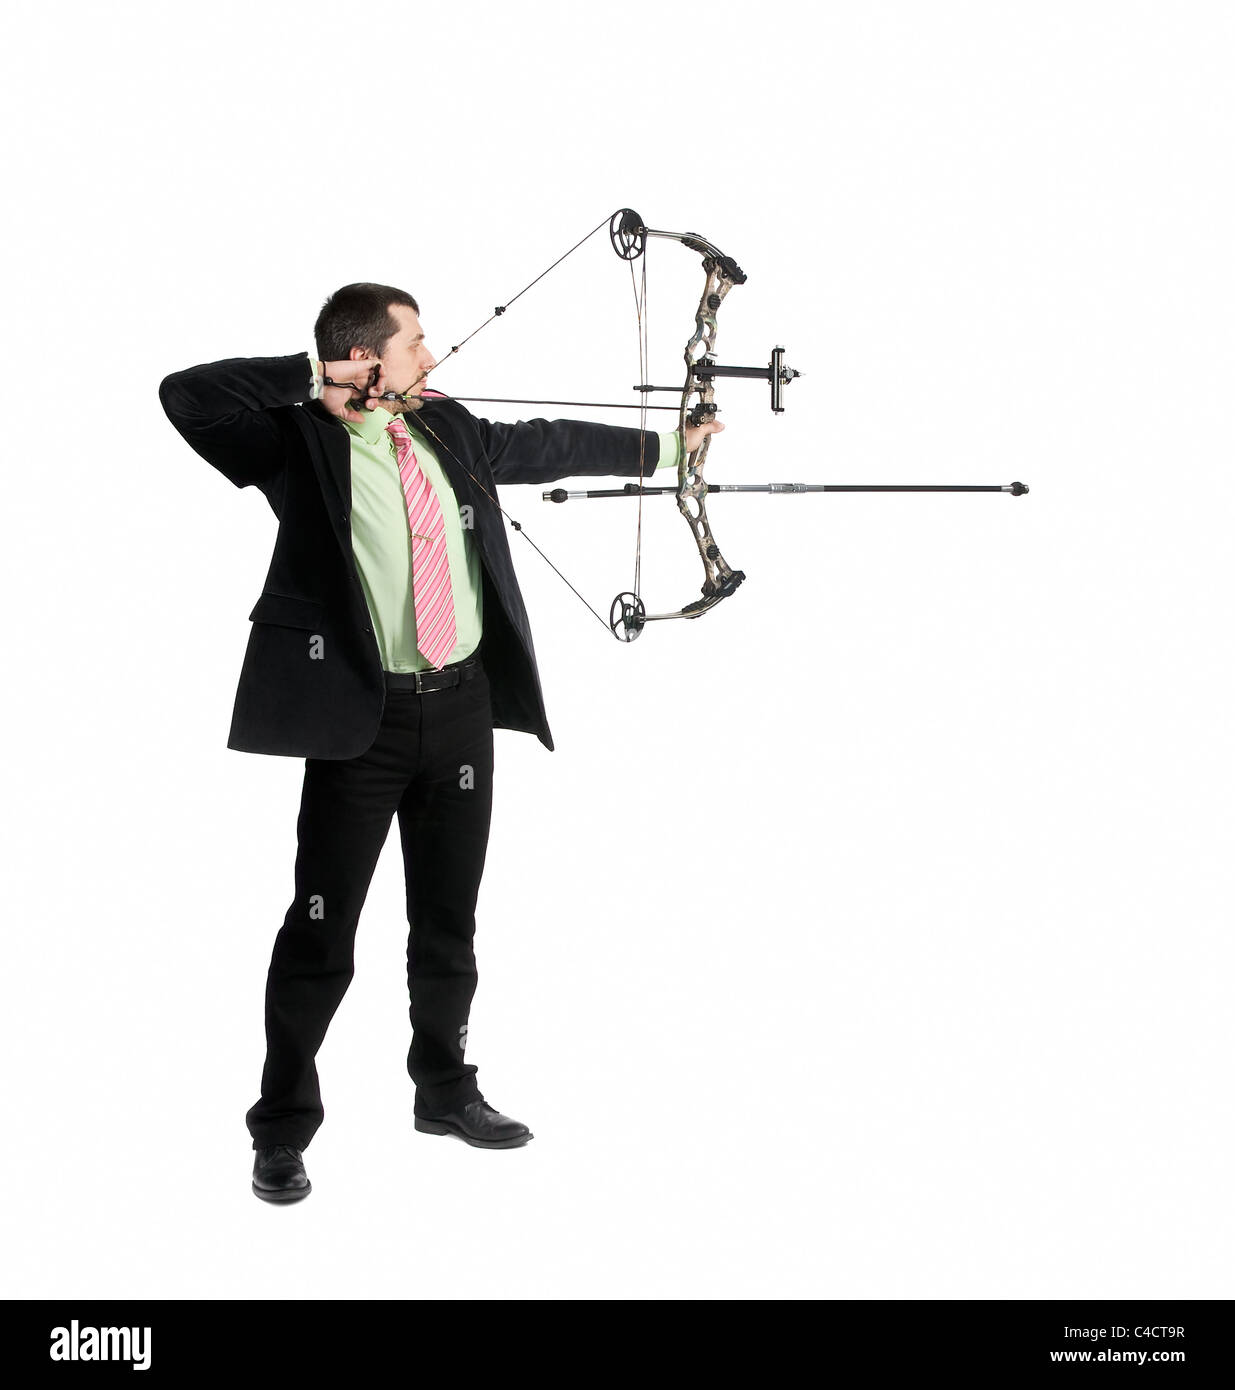 bow-hunter with a modern compound bow Stock Photo